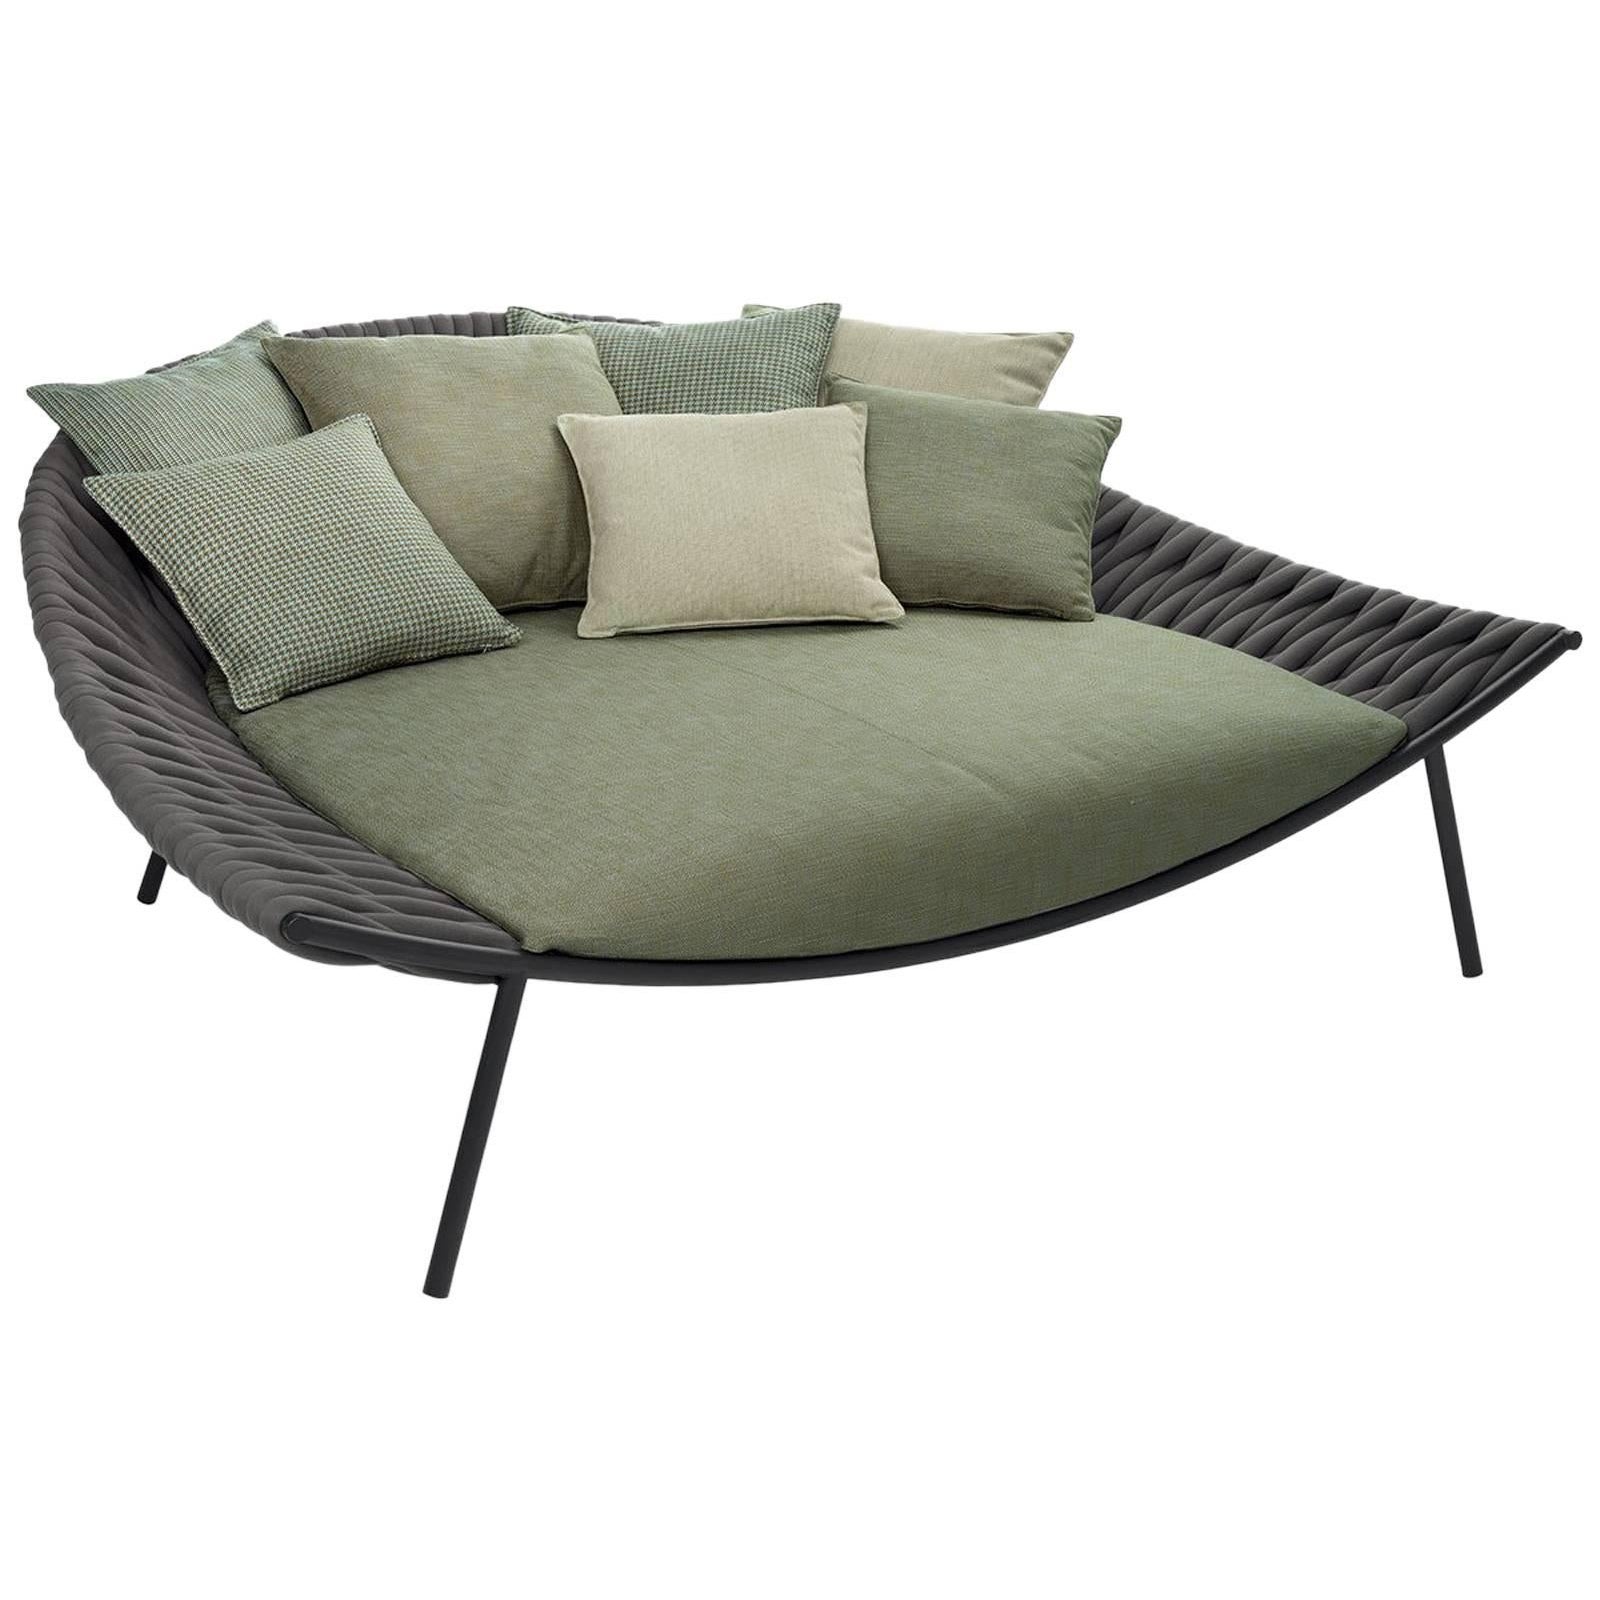 Roda Arena Outdoor Daybed Designed by Gordon Guillaumier